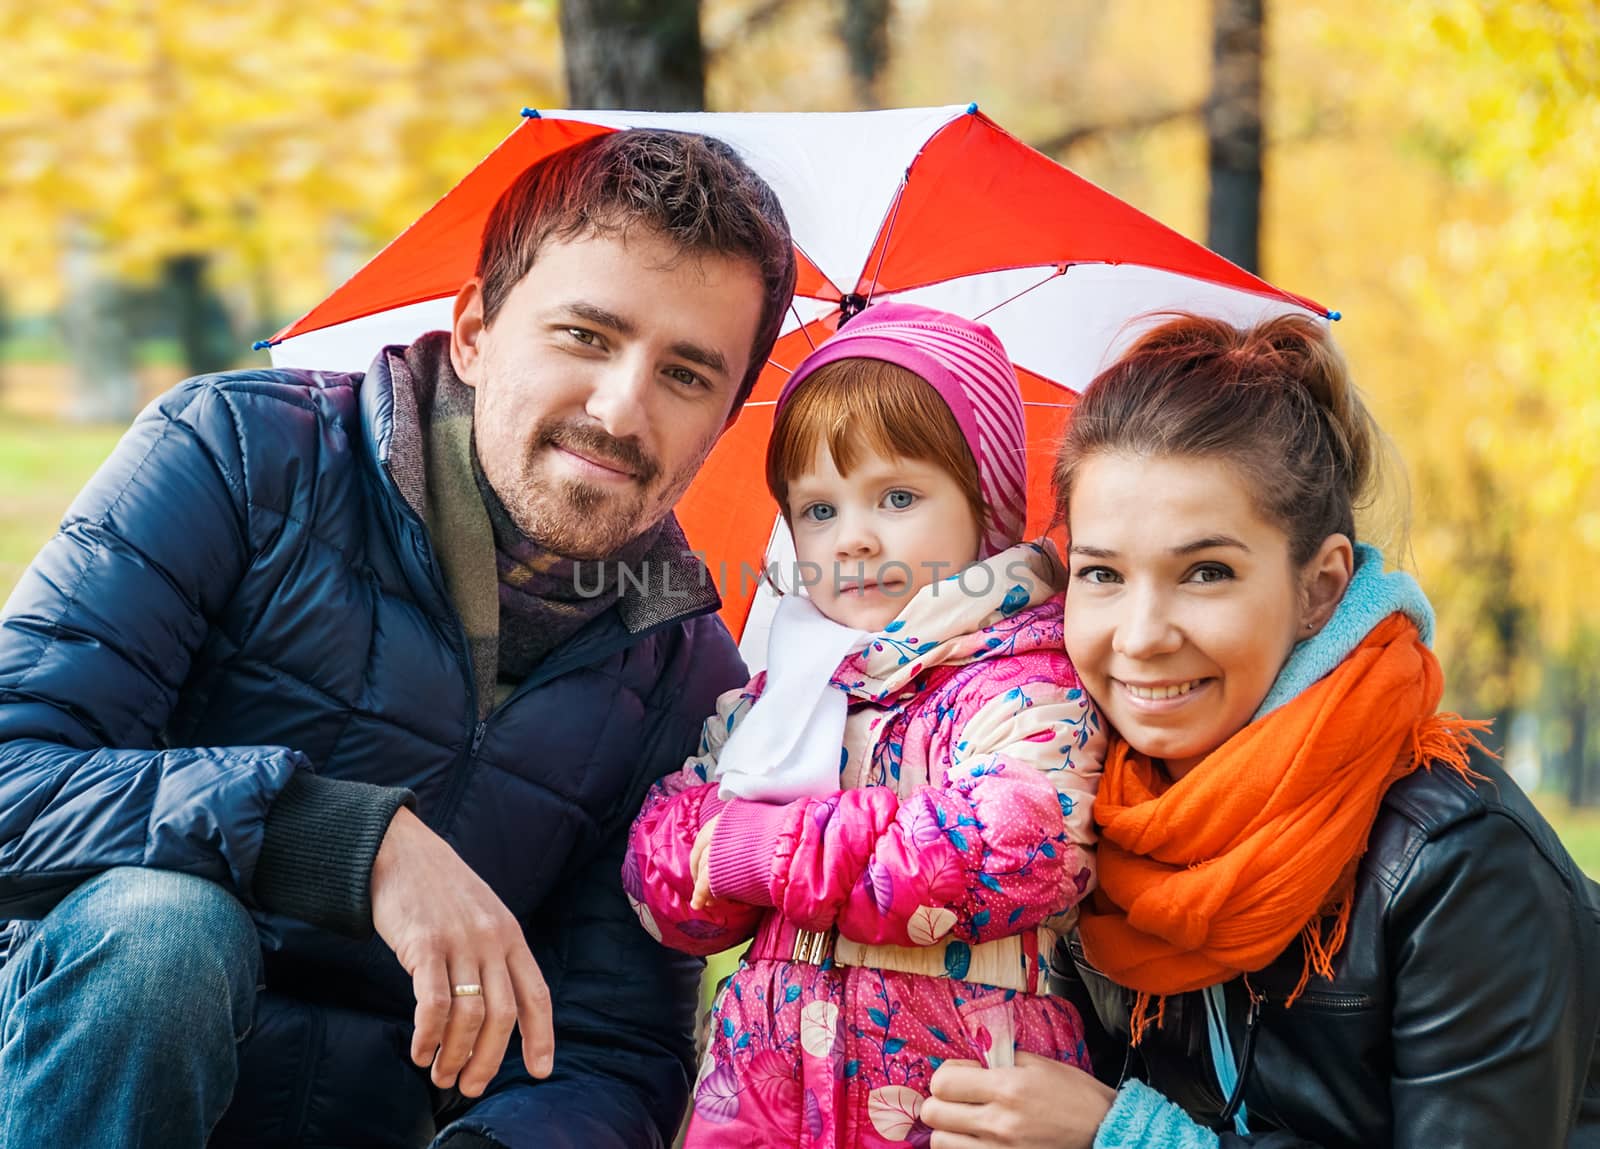 Happy young family under an umbrella in an autumn park by zeffss